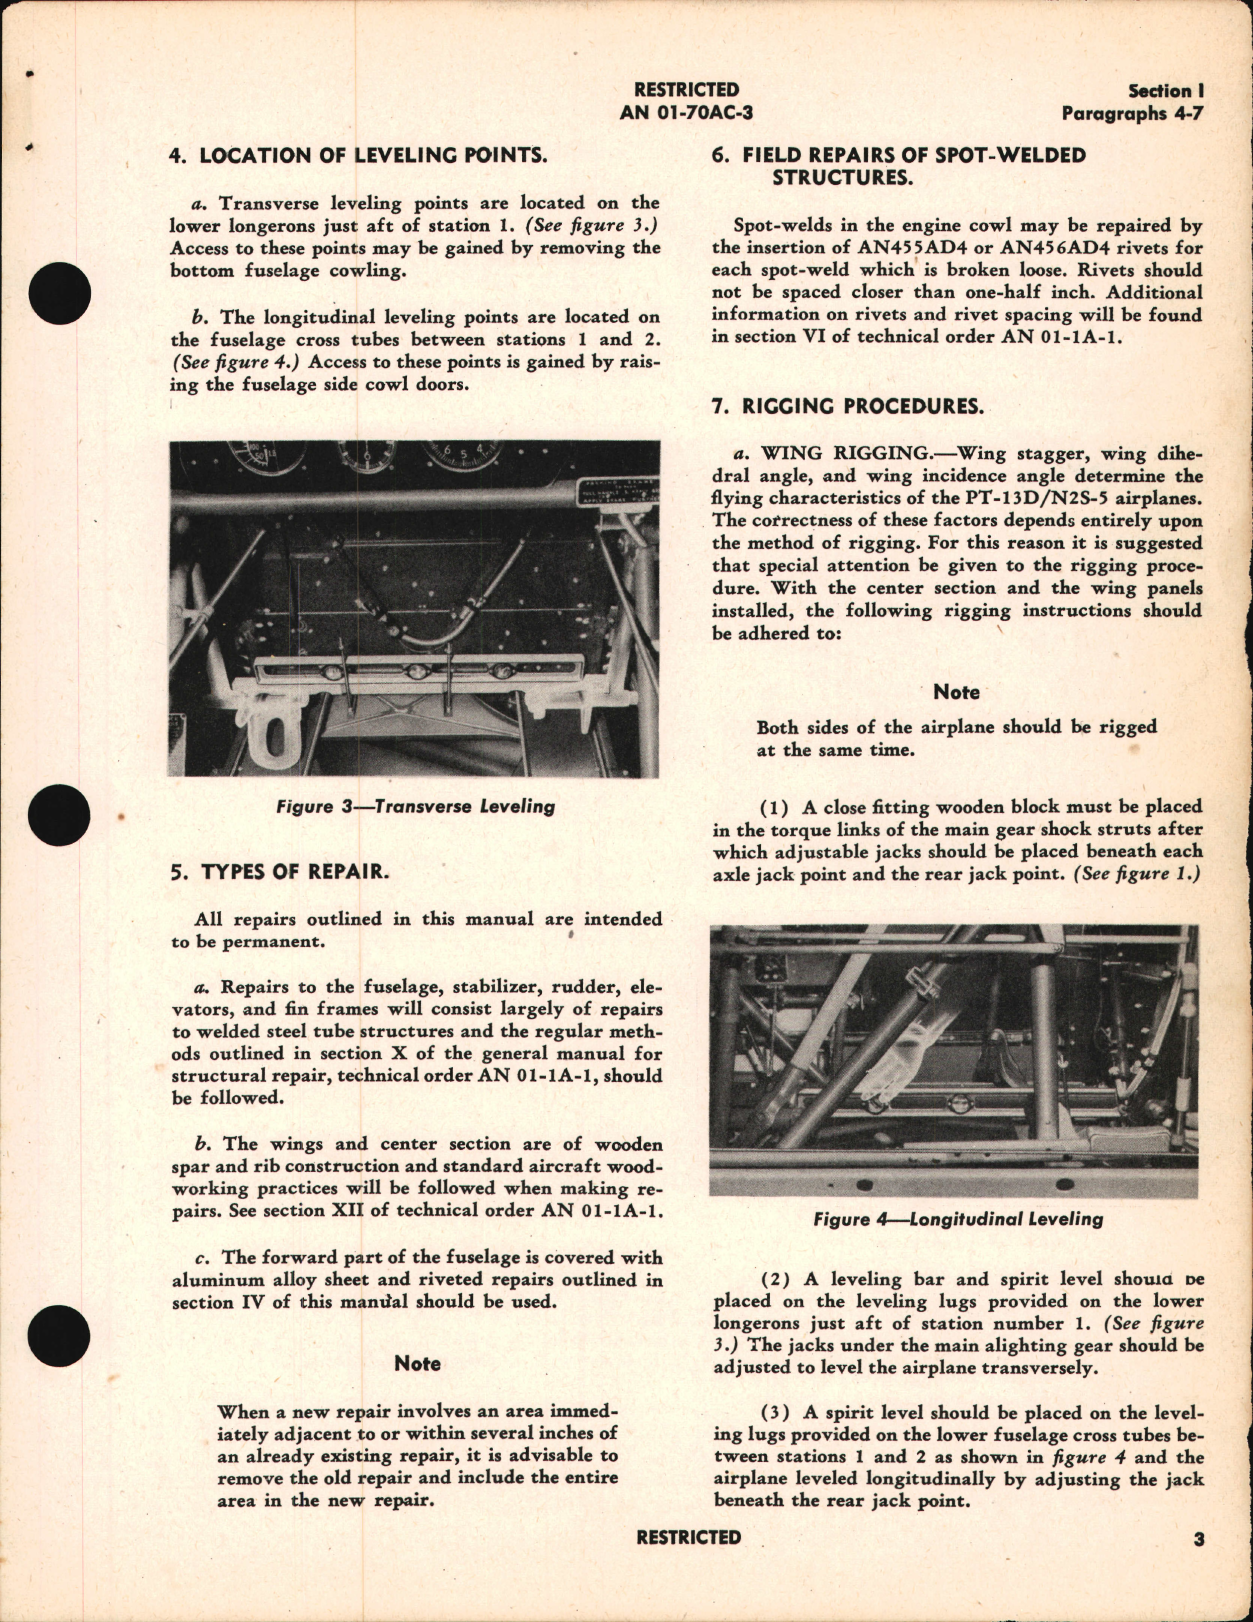 Sample page 7 from AirCorps Library document: Structural Repair Instructions for PT-13D and N2S-5